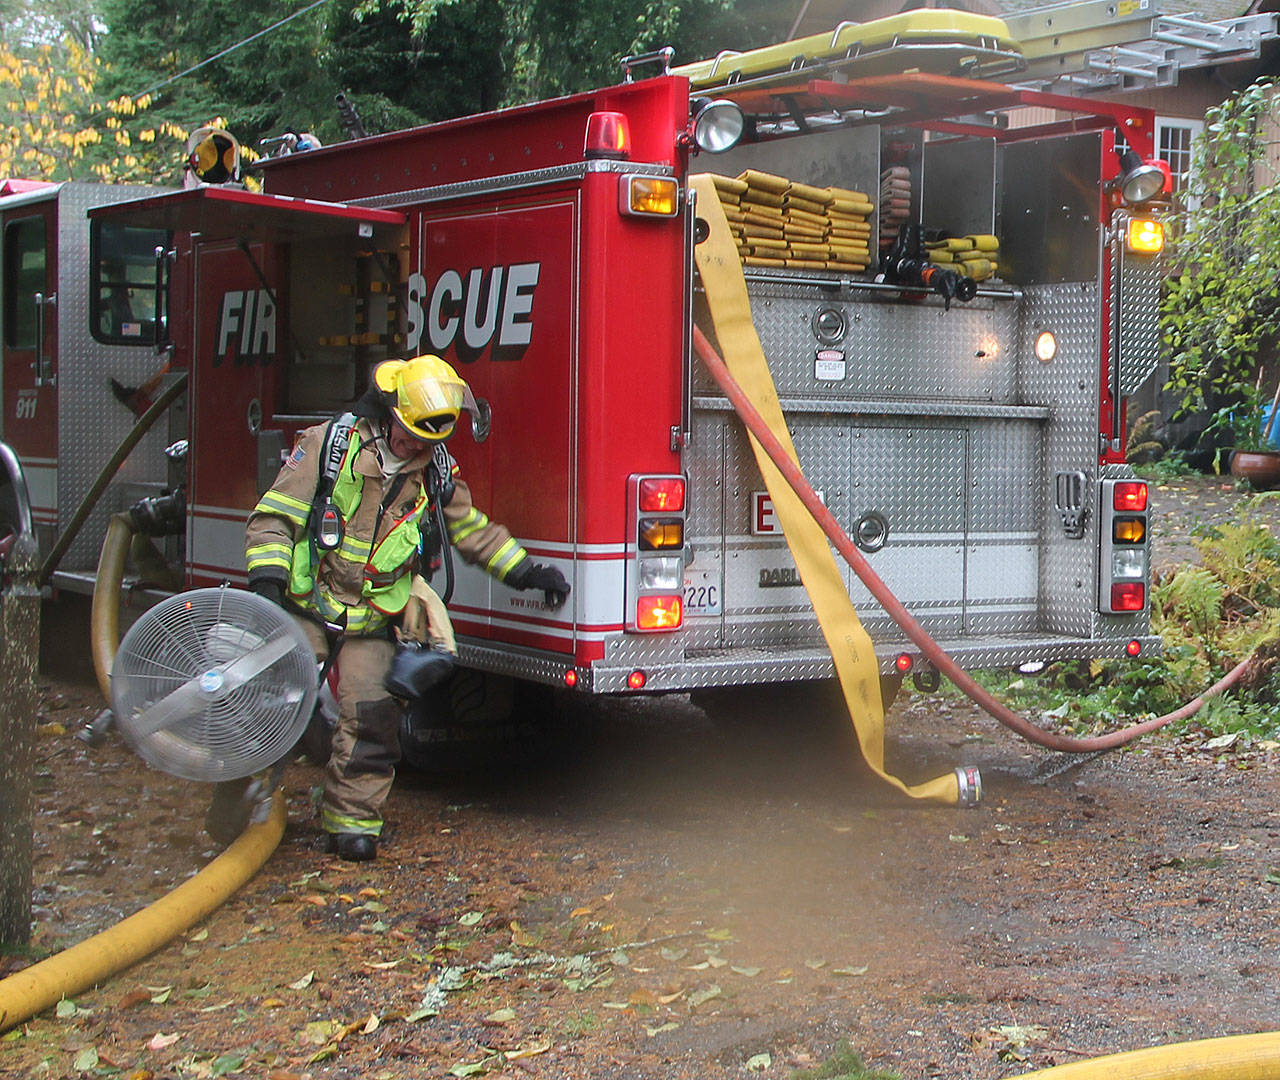 With the passage of the fire district’s levy, VIFR is working to hire more firefighters, both full and part time. Above, volunteer firefighter Mike Kirk assists at last week’s house fire. (Susan Riemer/Staff Photo)